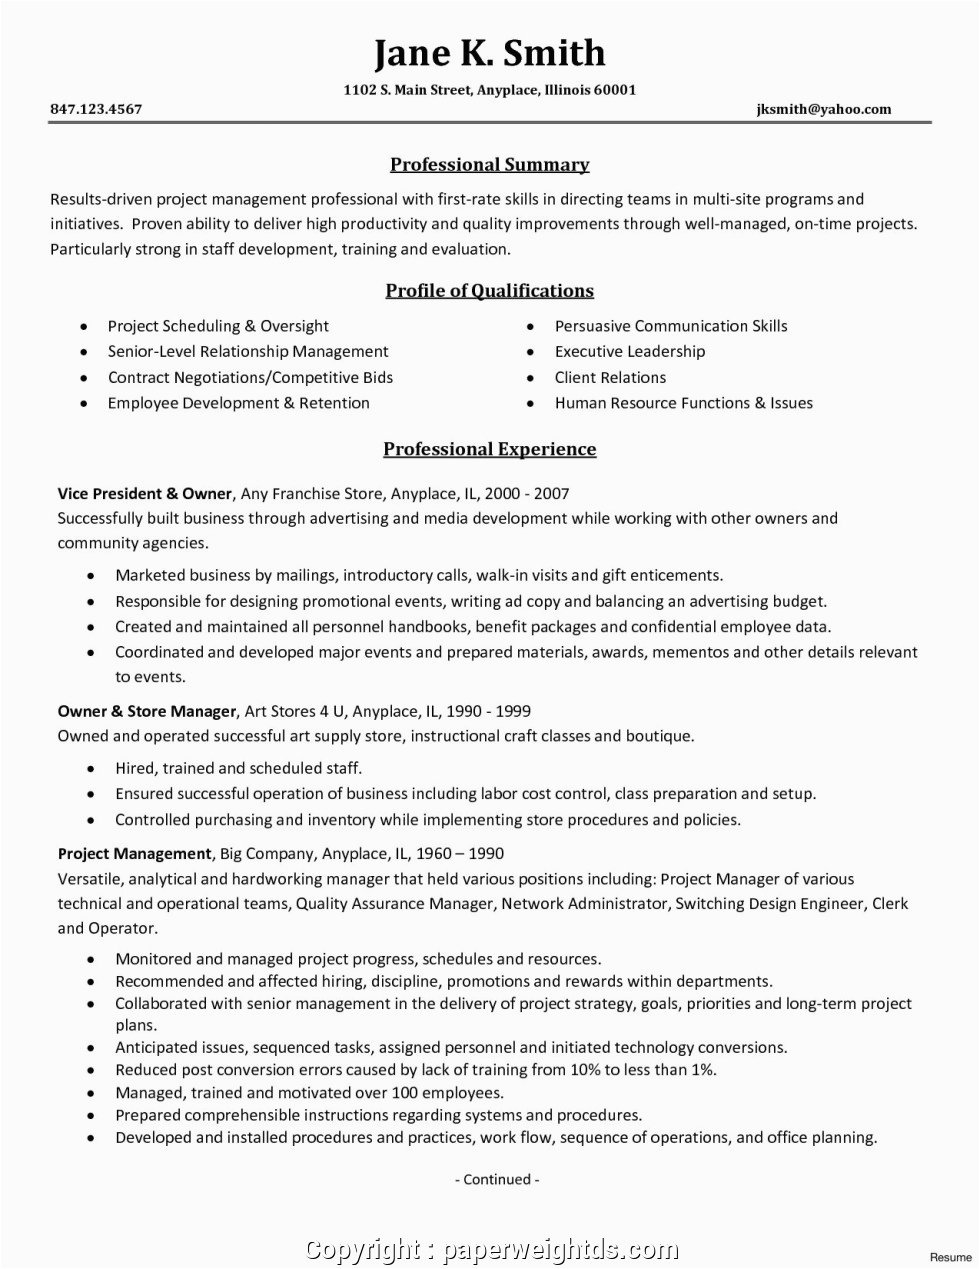 Entry Level Project Manager Resume Sample Modern Entry Level Program Manager Resume Entry Level